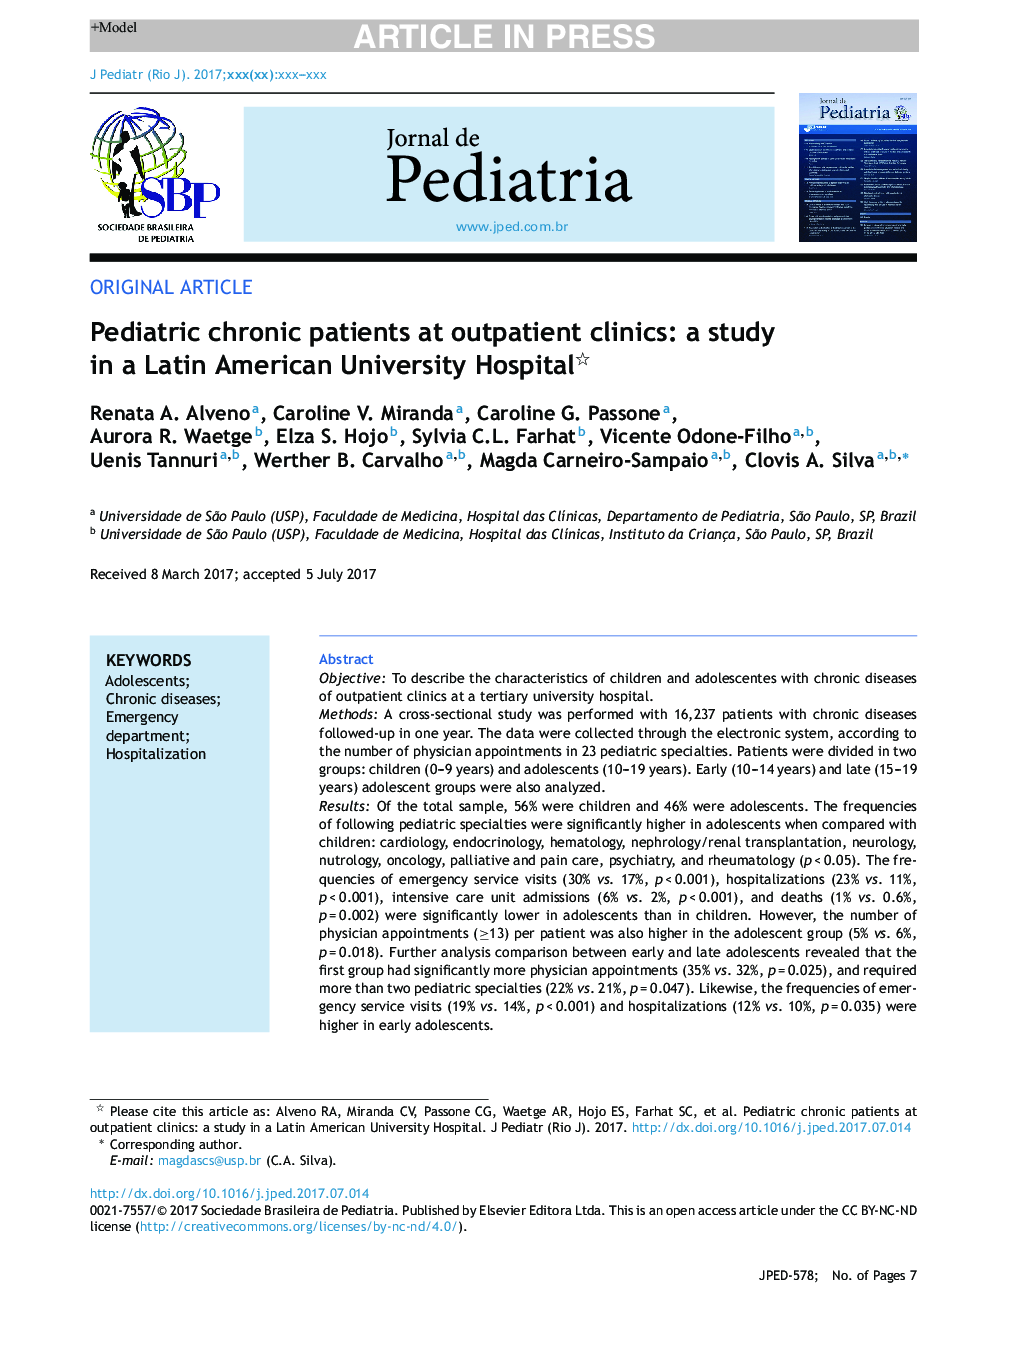 Pediatric chronic patients at outpatient clinics: a study in a Latin American University Hospital